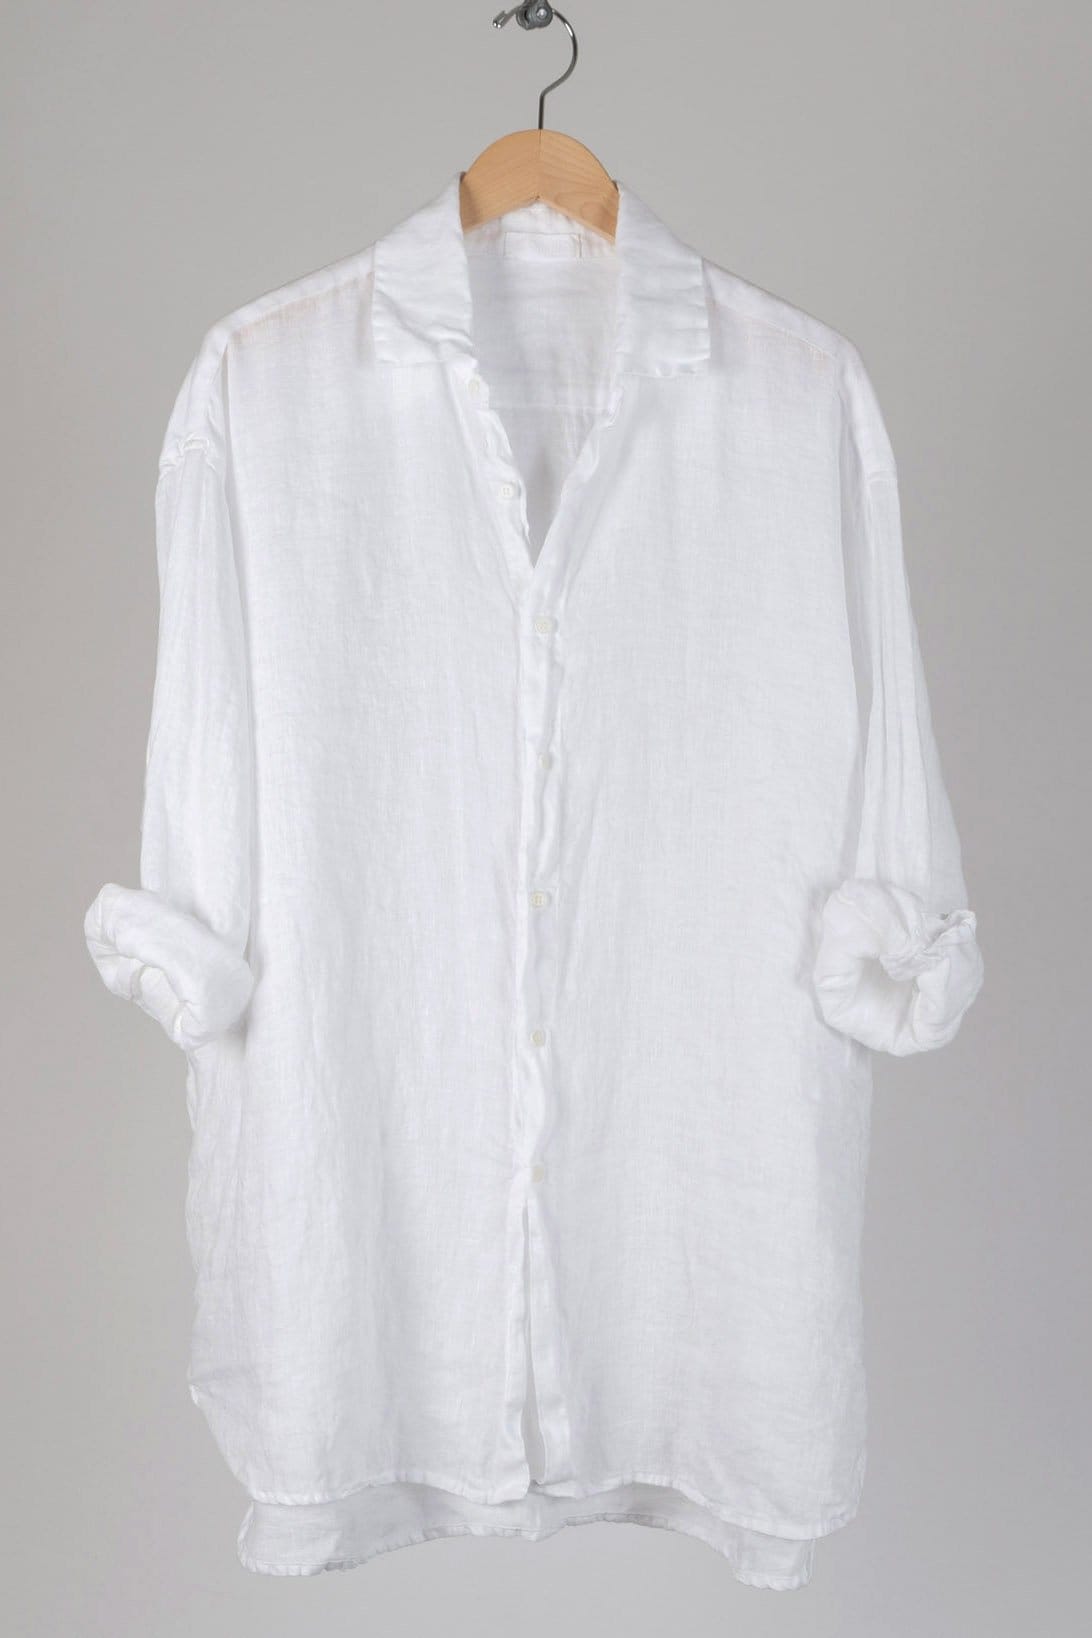 Oversized tunic length button up with a collar. Featuring tab sleeves and a high low hem.